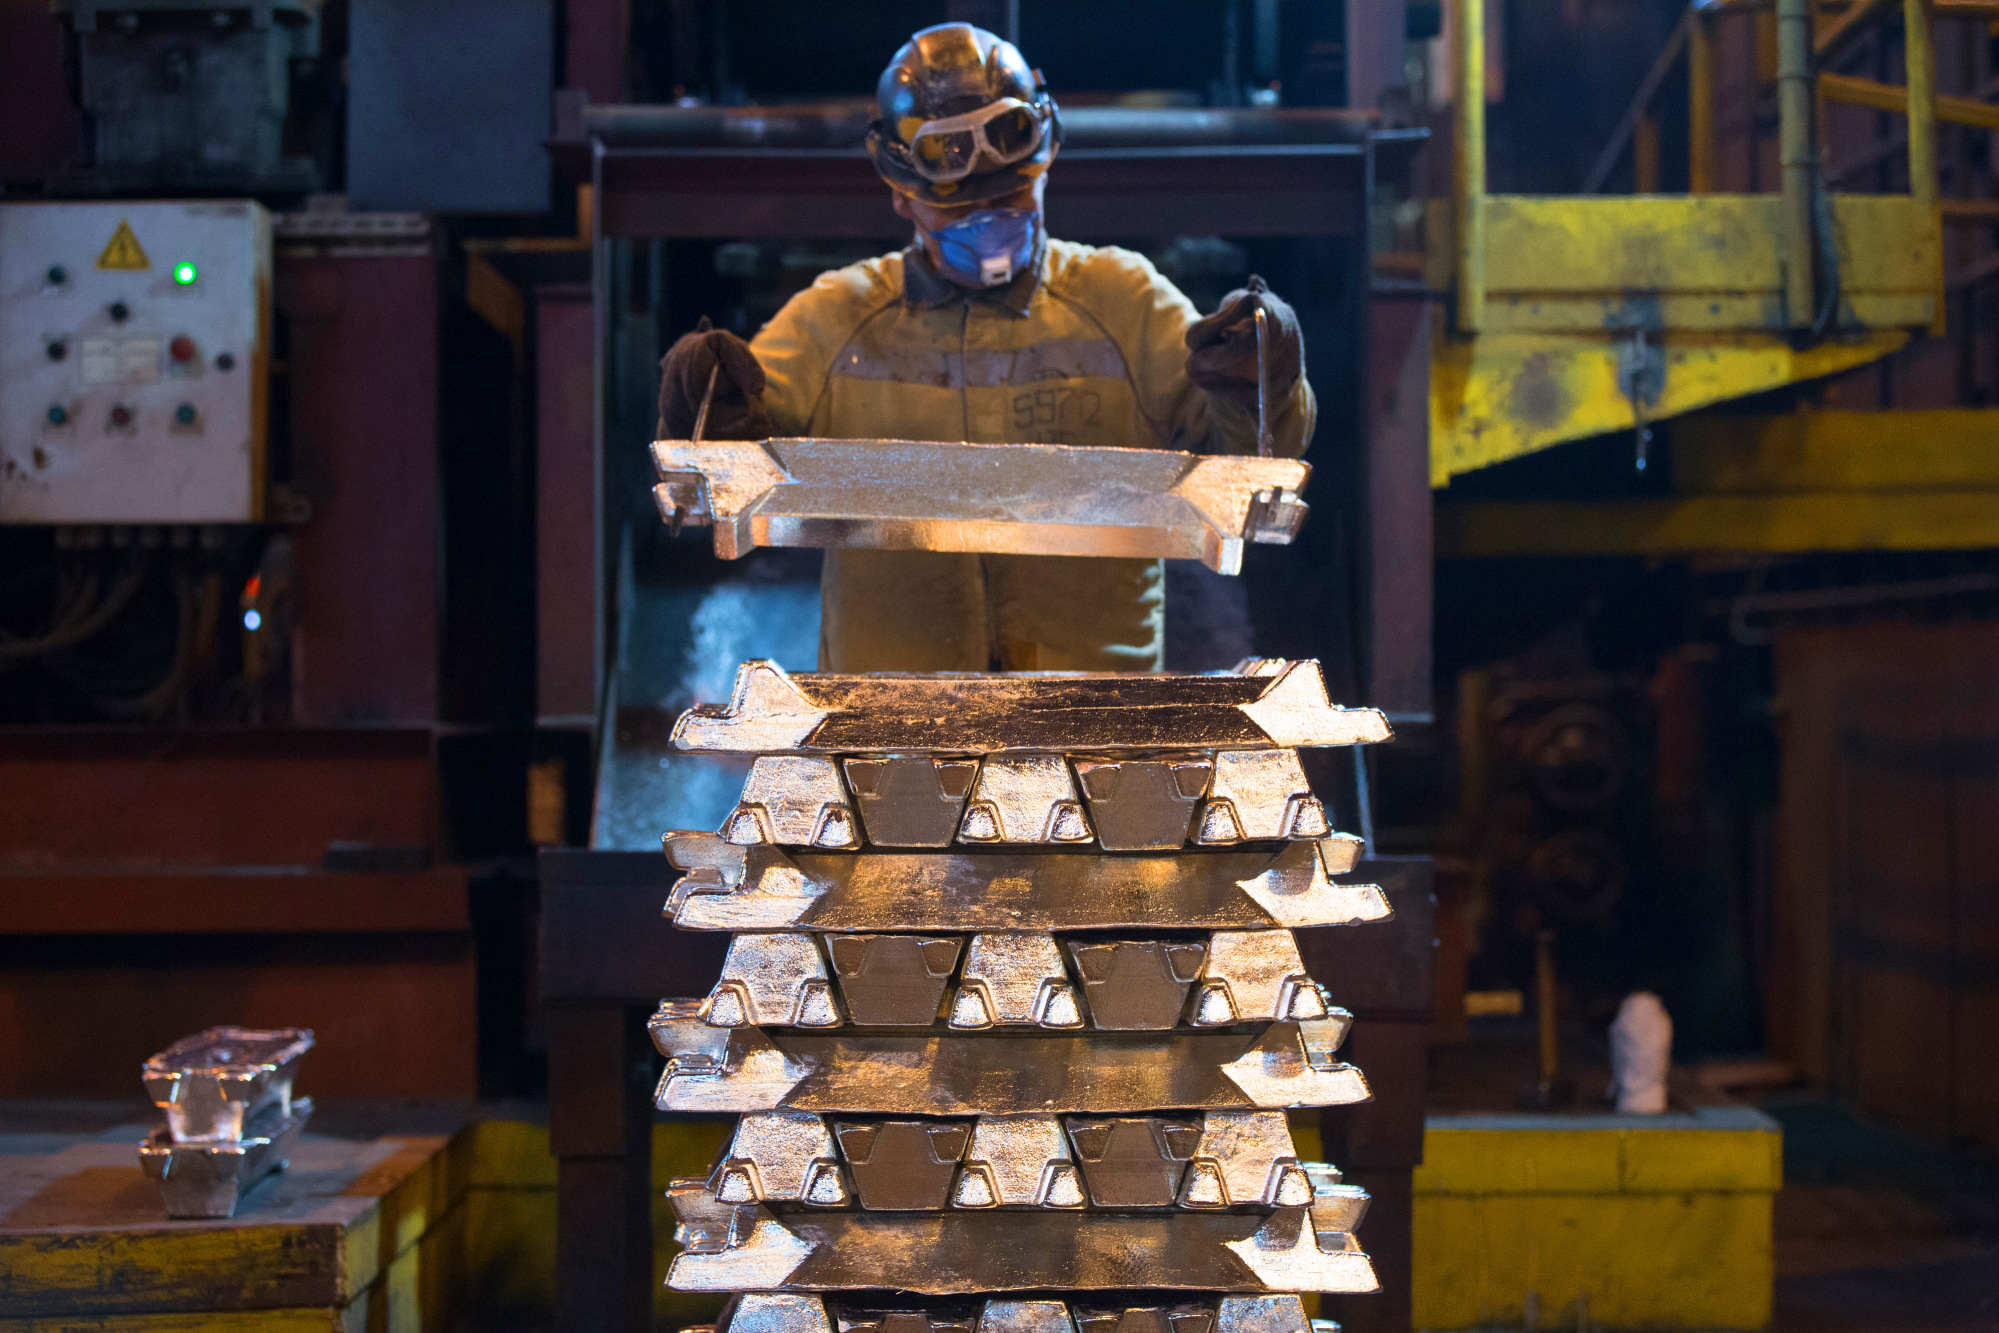 A worker stacks aluminum ingots to make ready for shipping at an aluminum smelter, operated by United Co. Rusal, in Krasnoyarsk, Russia.